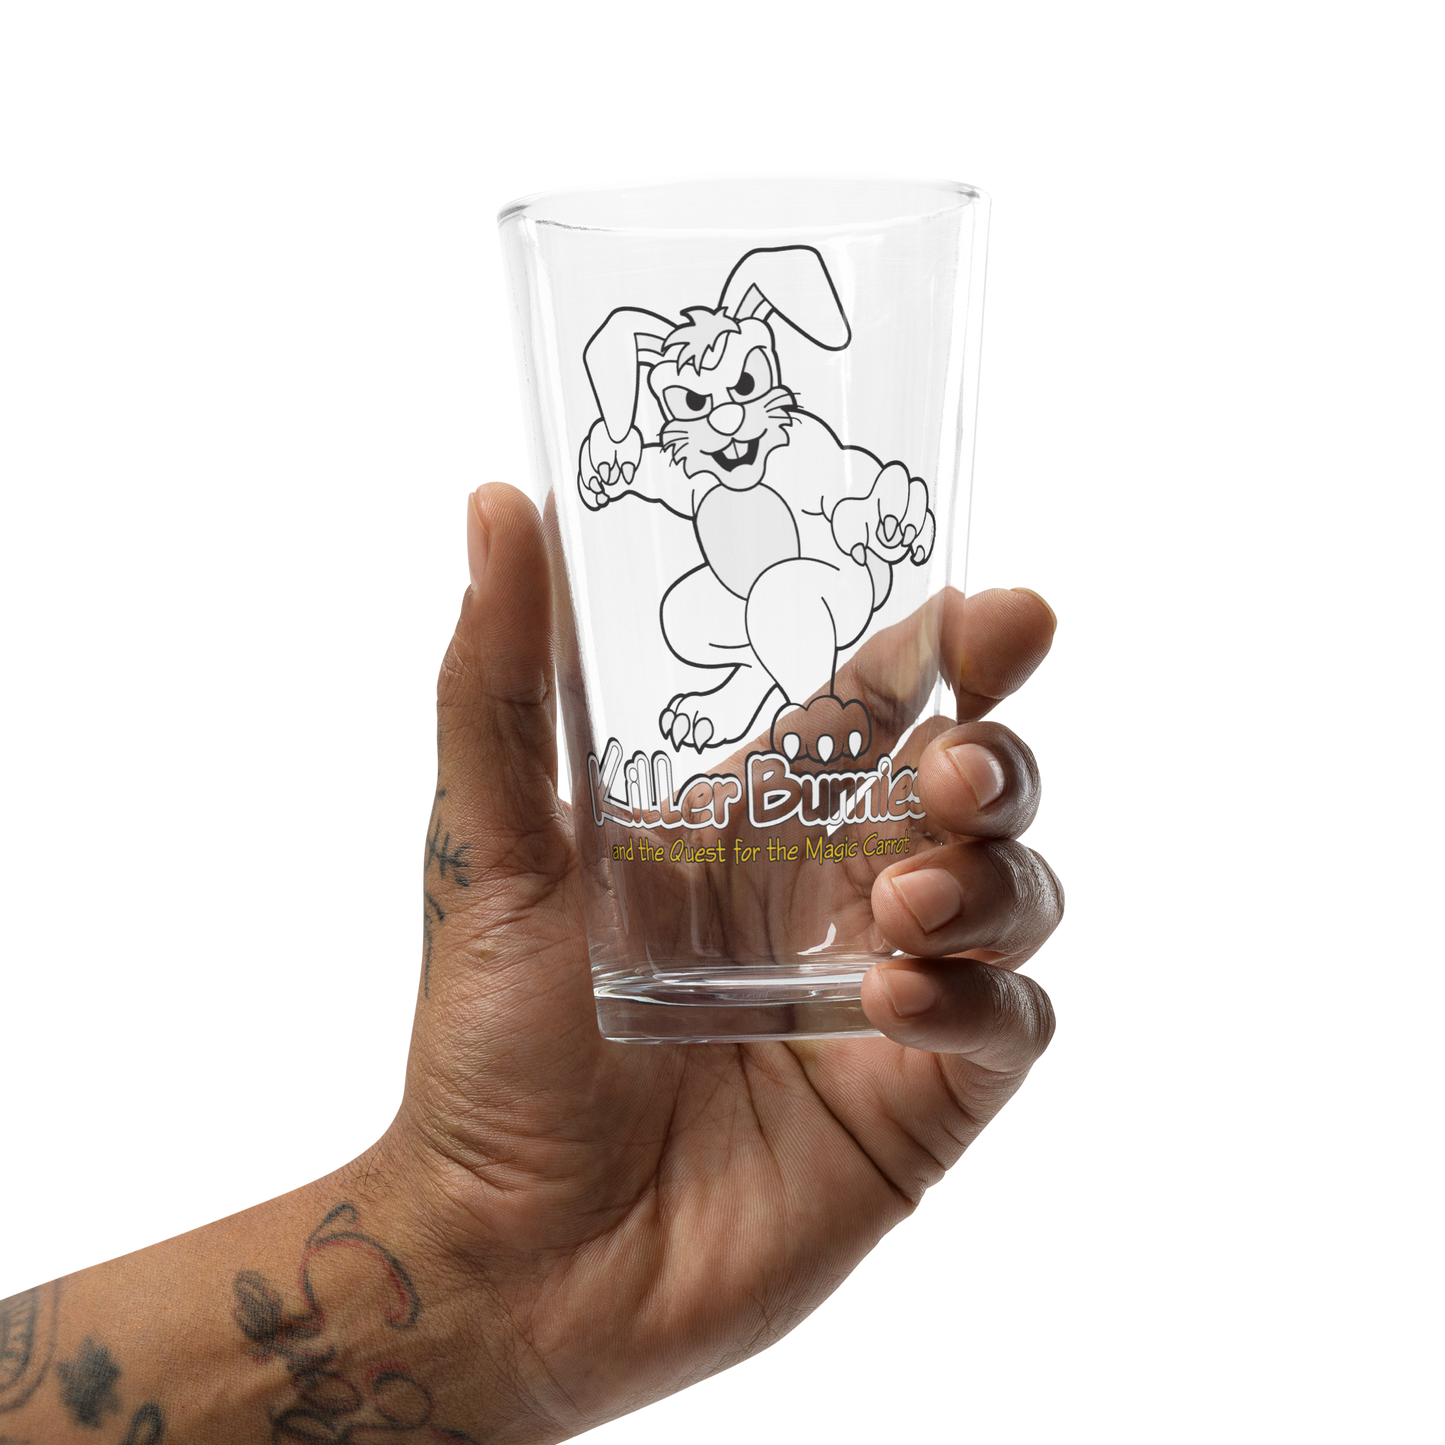 person holding Truculent Bunny Pint Glass